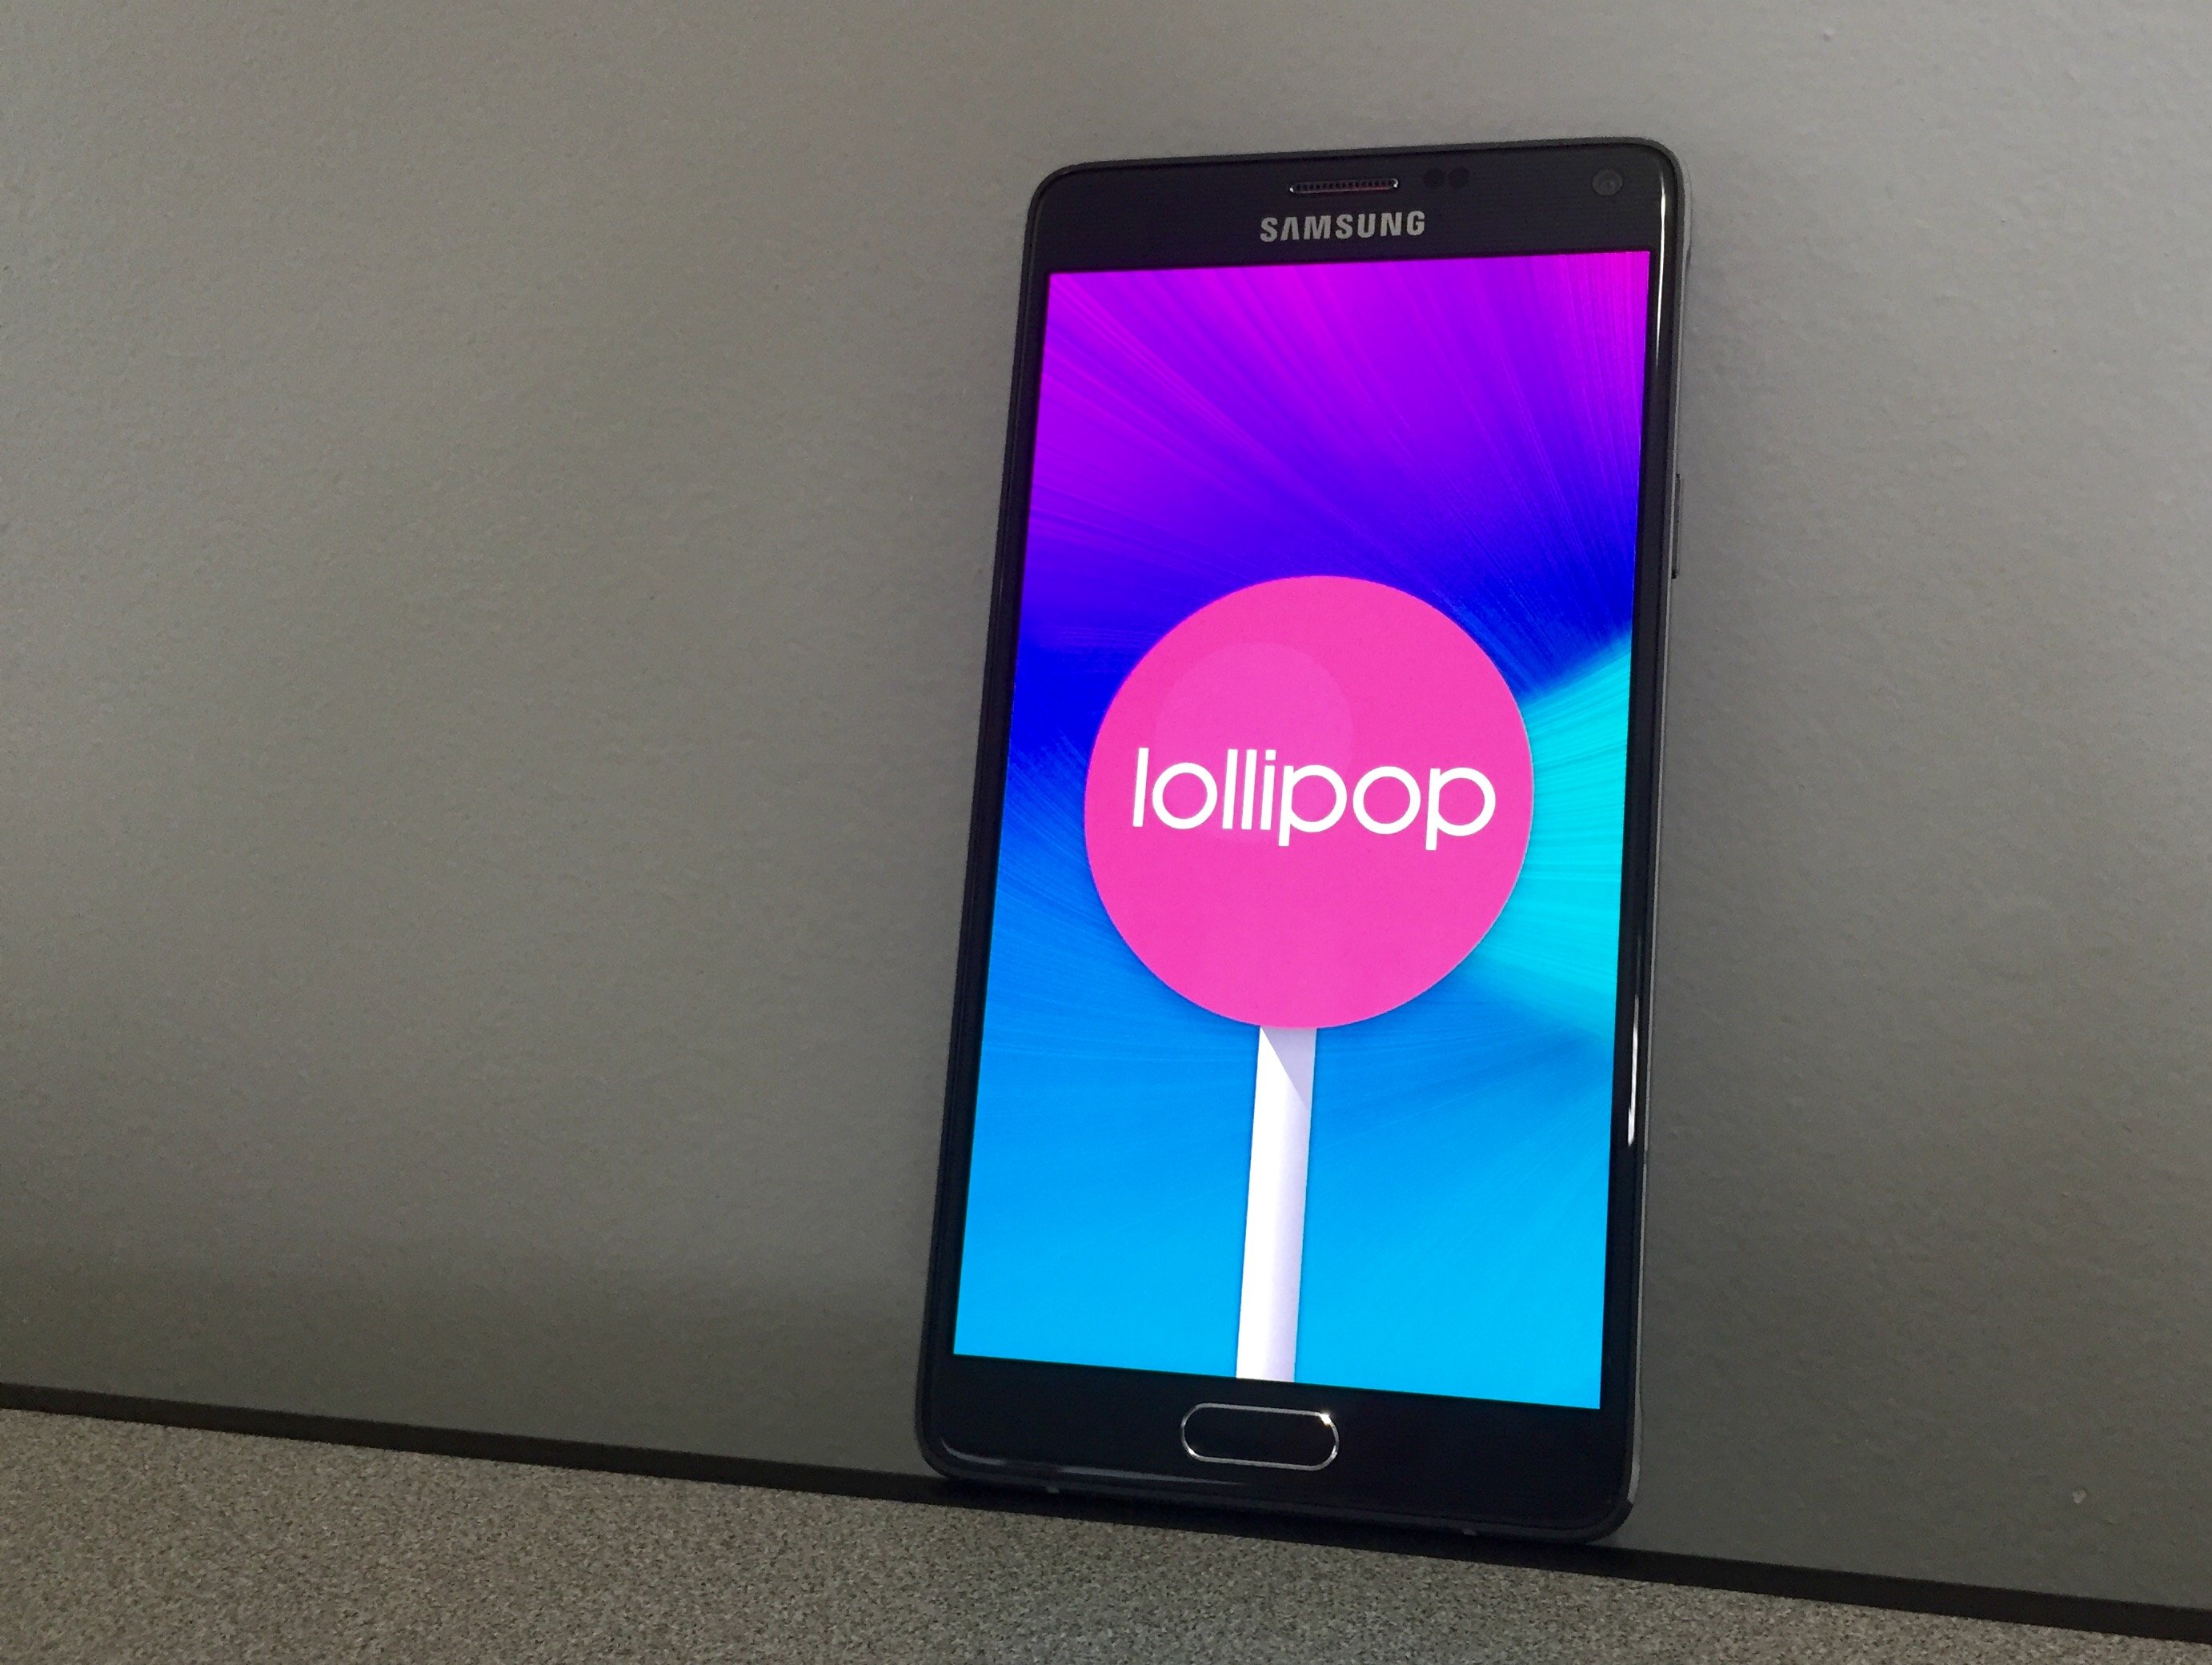 Here's a our full Verizon Galaxy Note 4 Lollipop review.